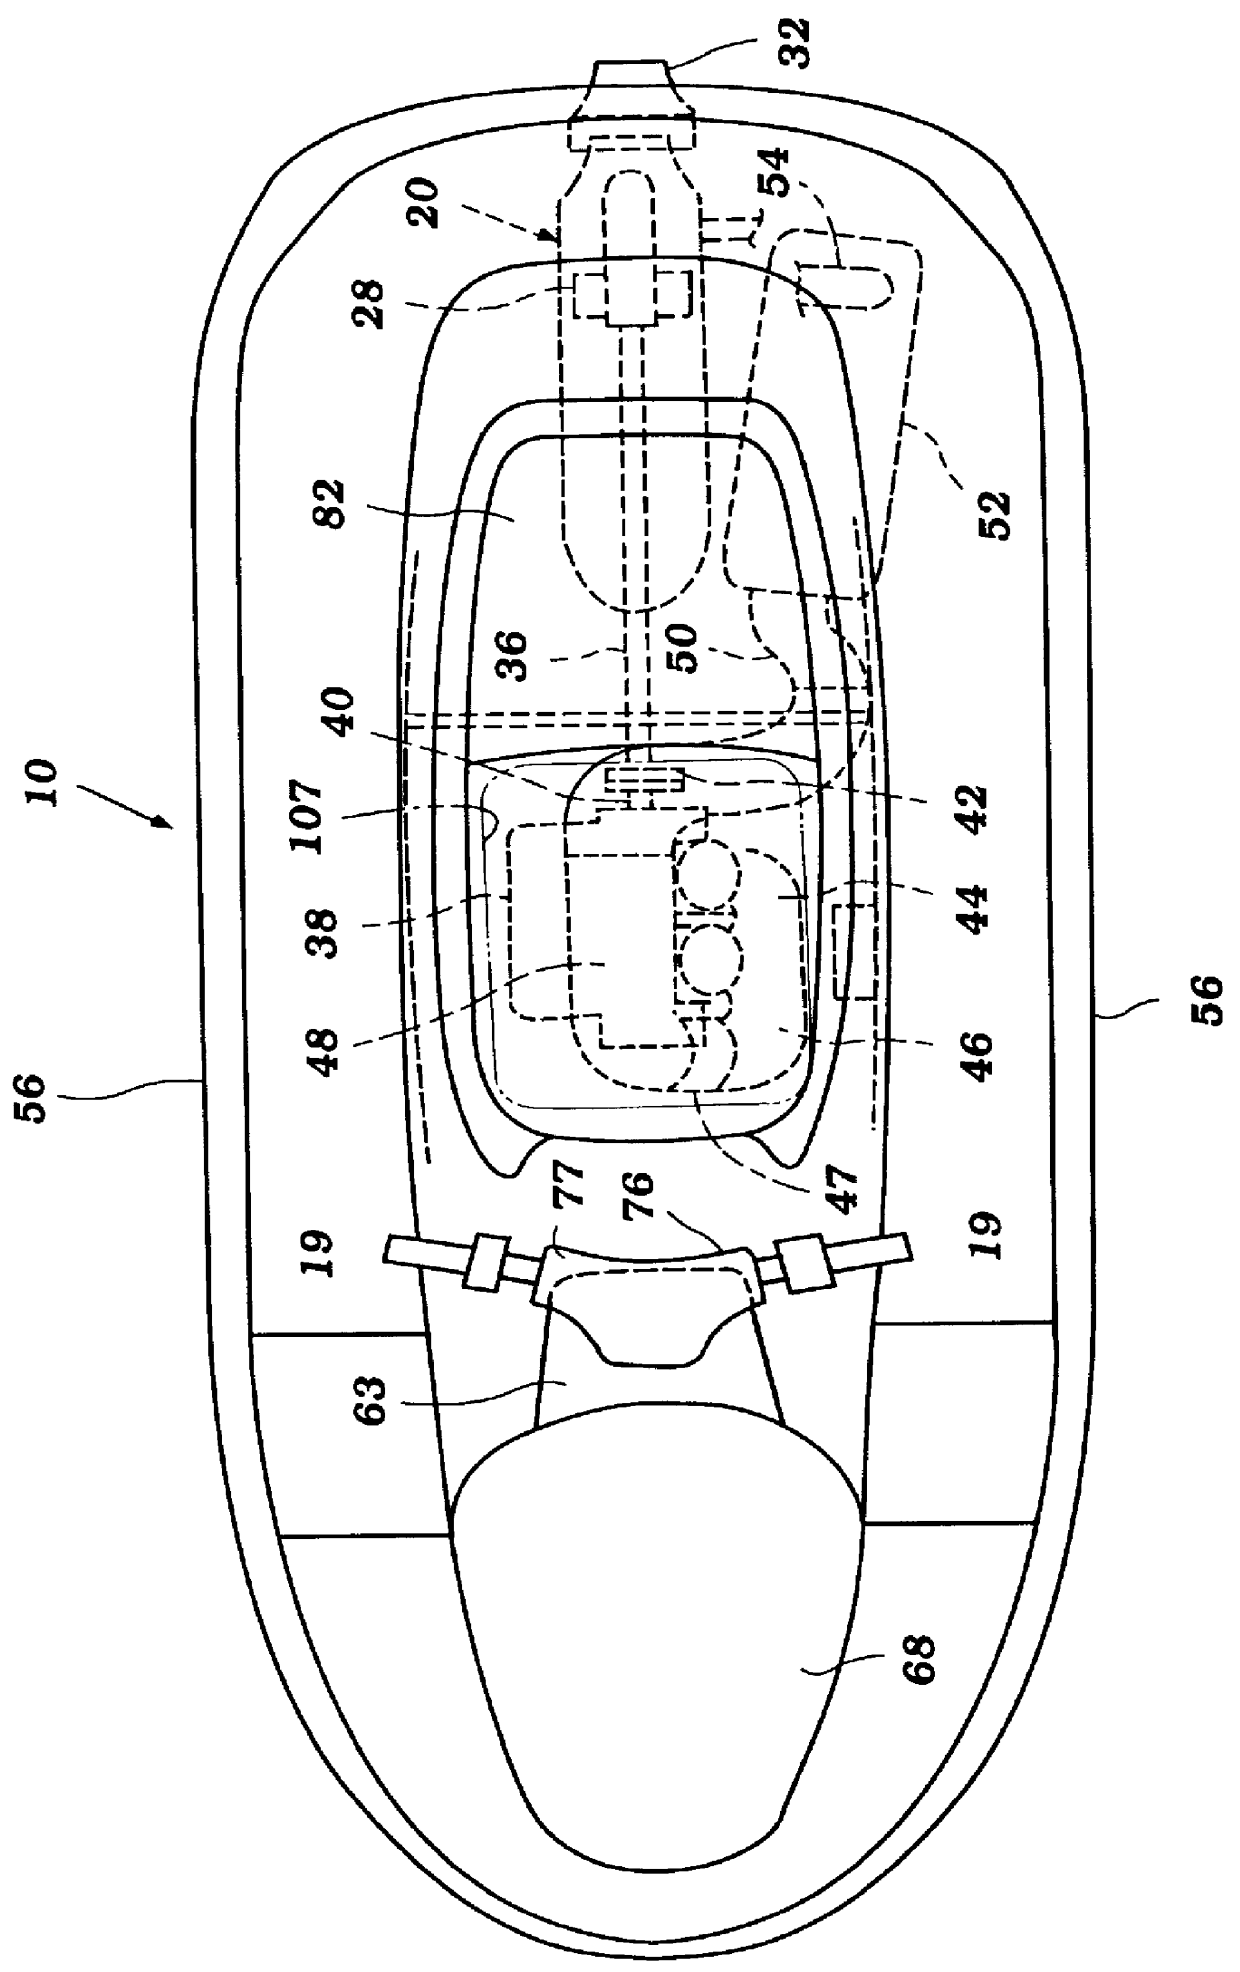 Mounting assembly for watercraft steering operator